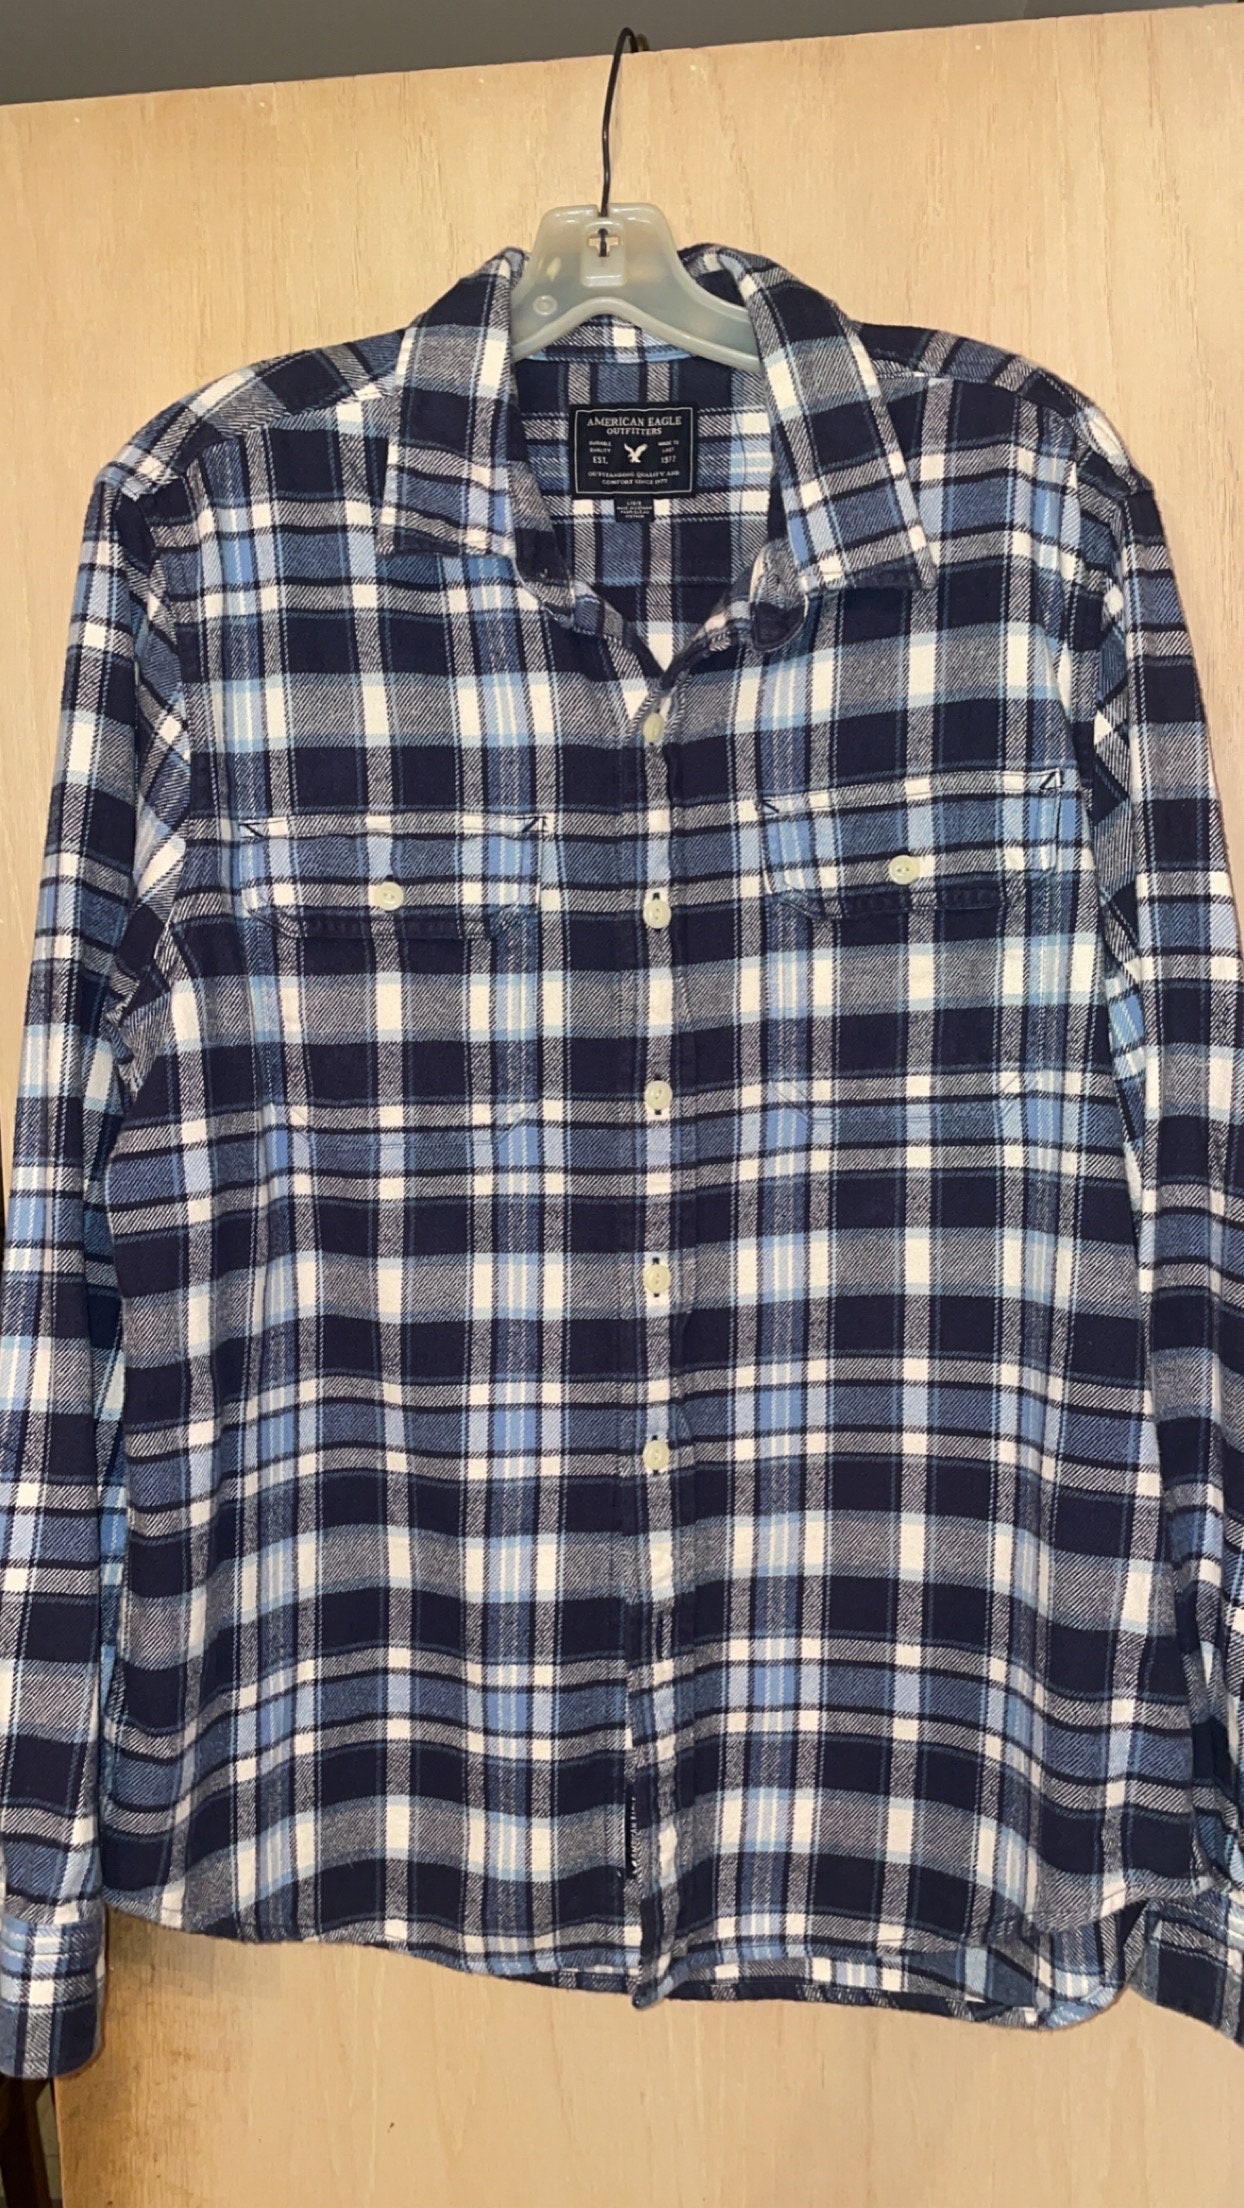 NY Yankees Graphic Tee Patchwork Flannel Plaid Shirt. Unisex - Etsy